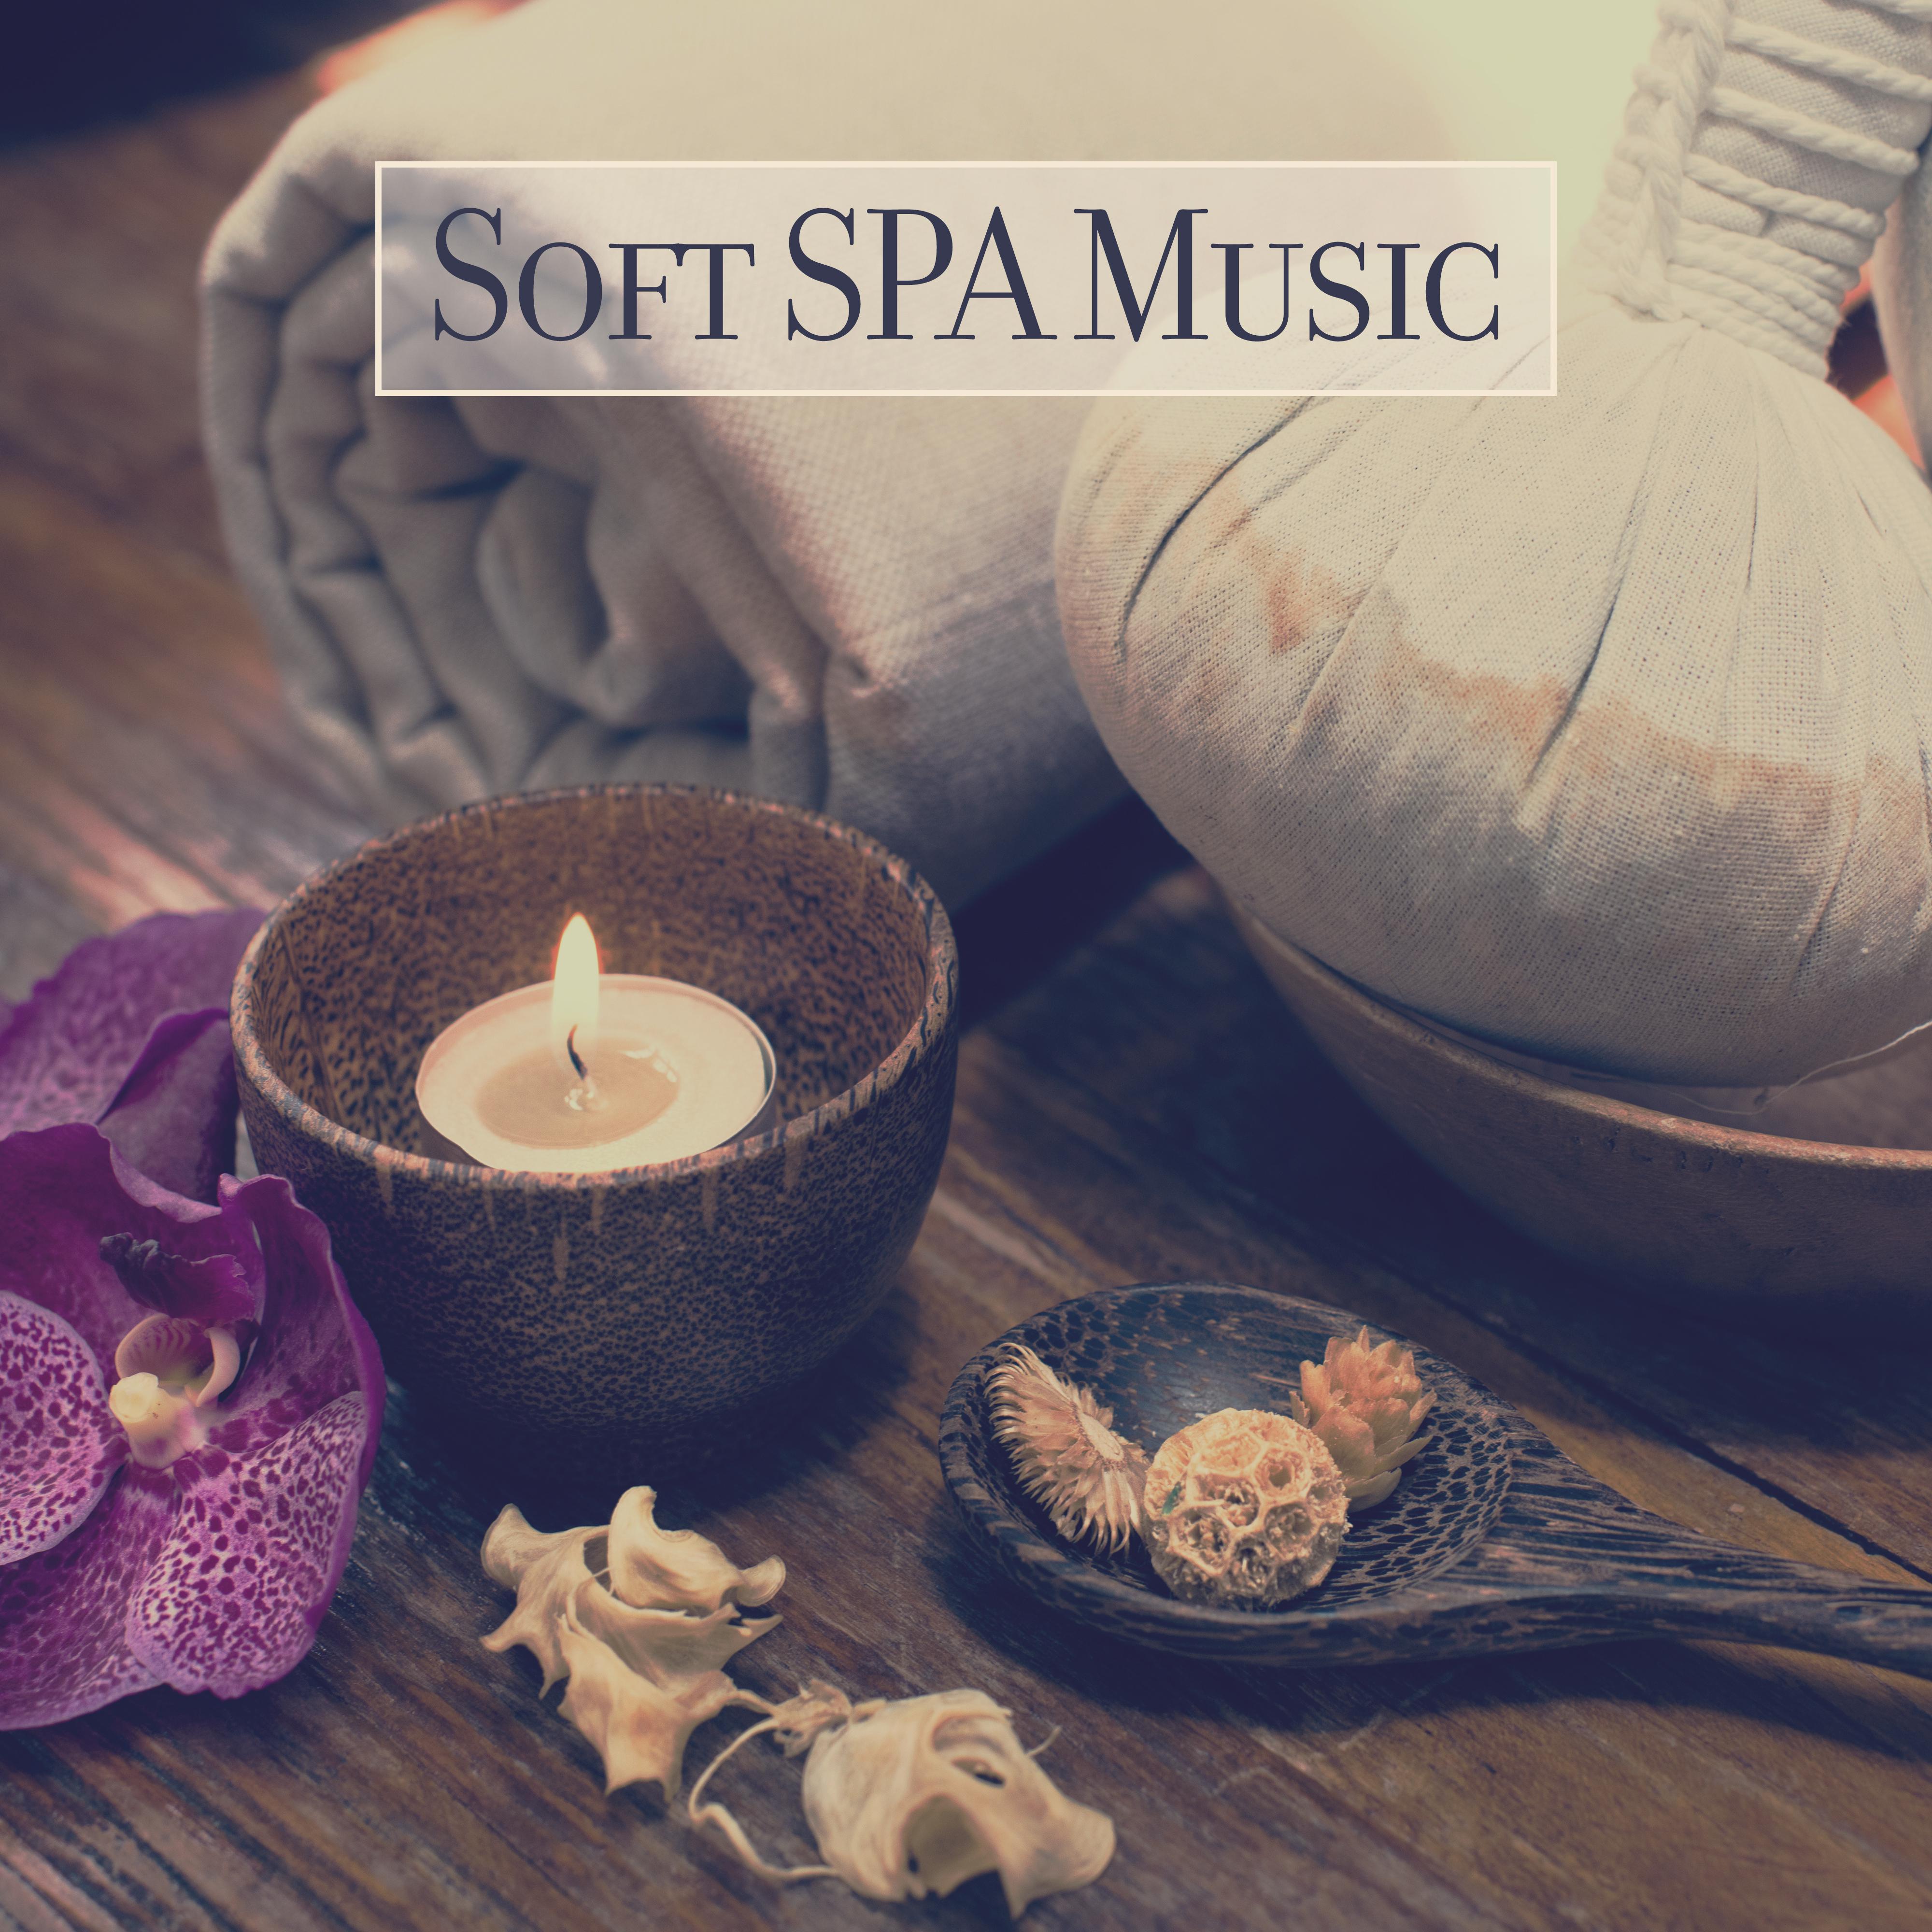 Soft SPA Music: Mix of the Most Beautiful Spa Music, Sounds of Nature and Relaxing Music 2019